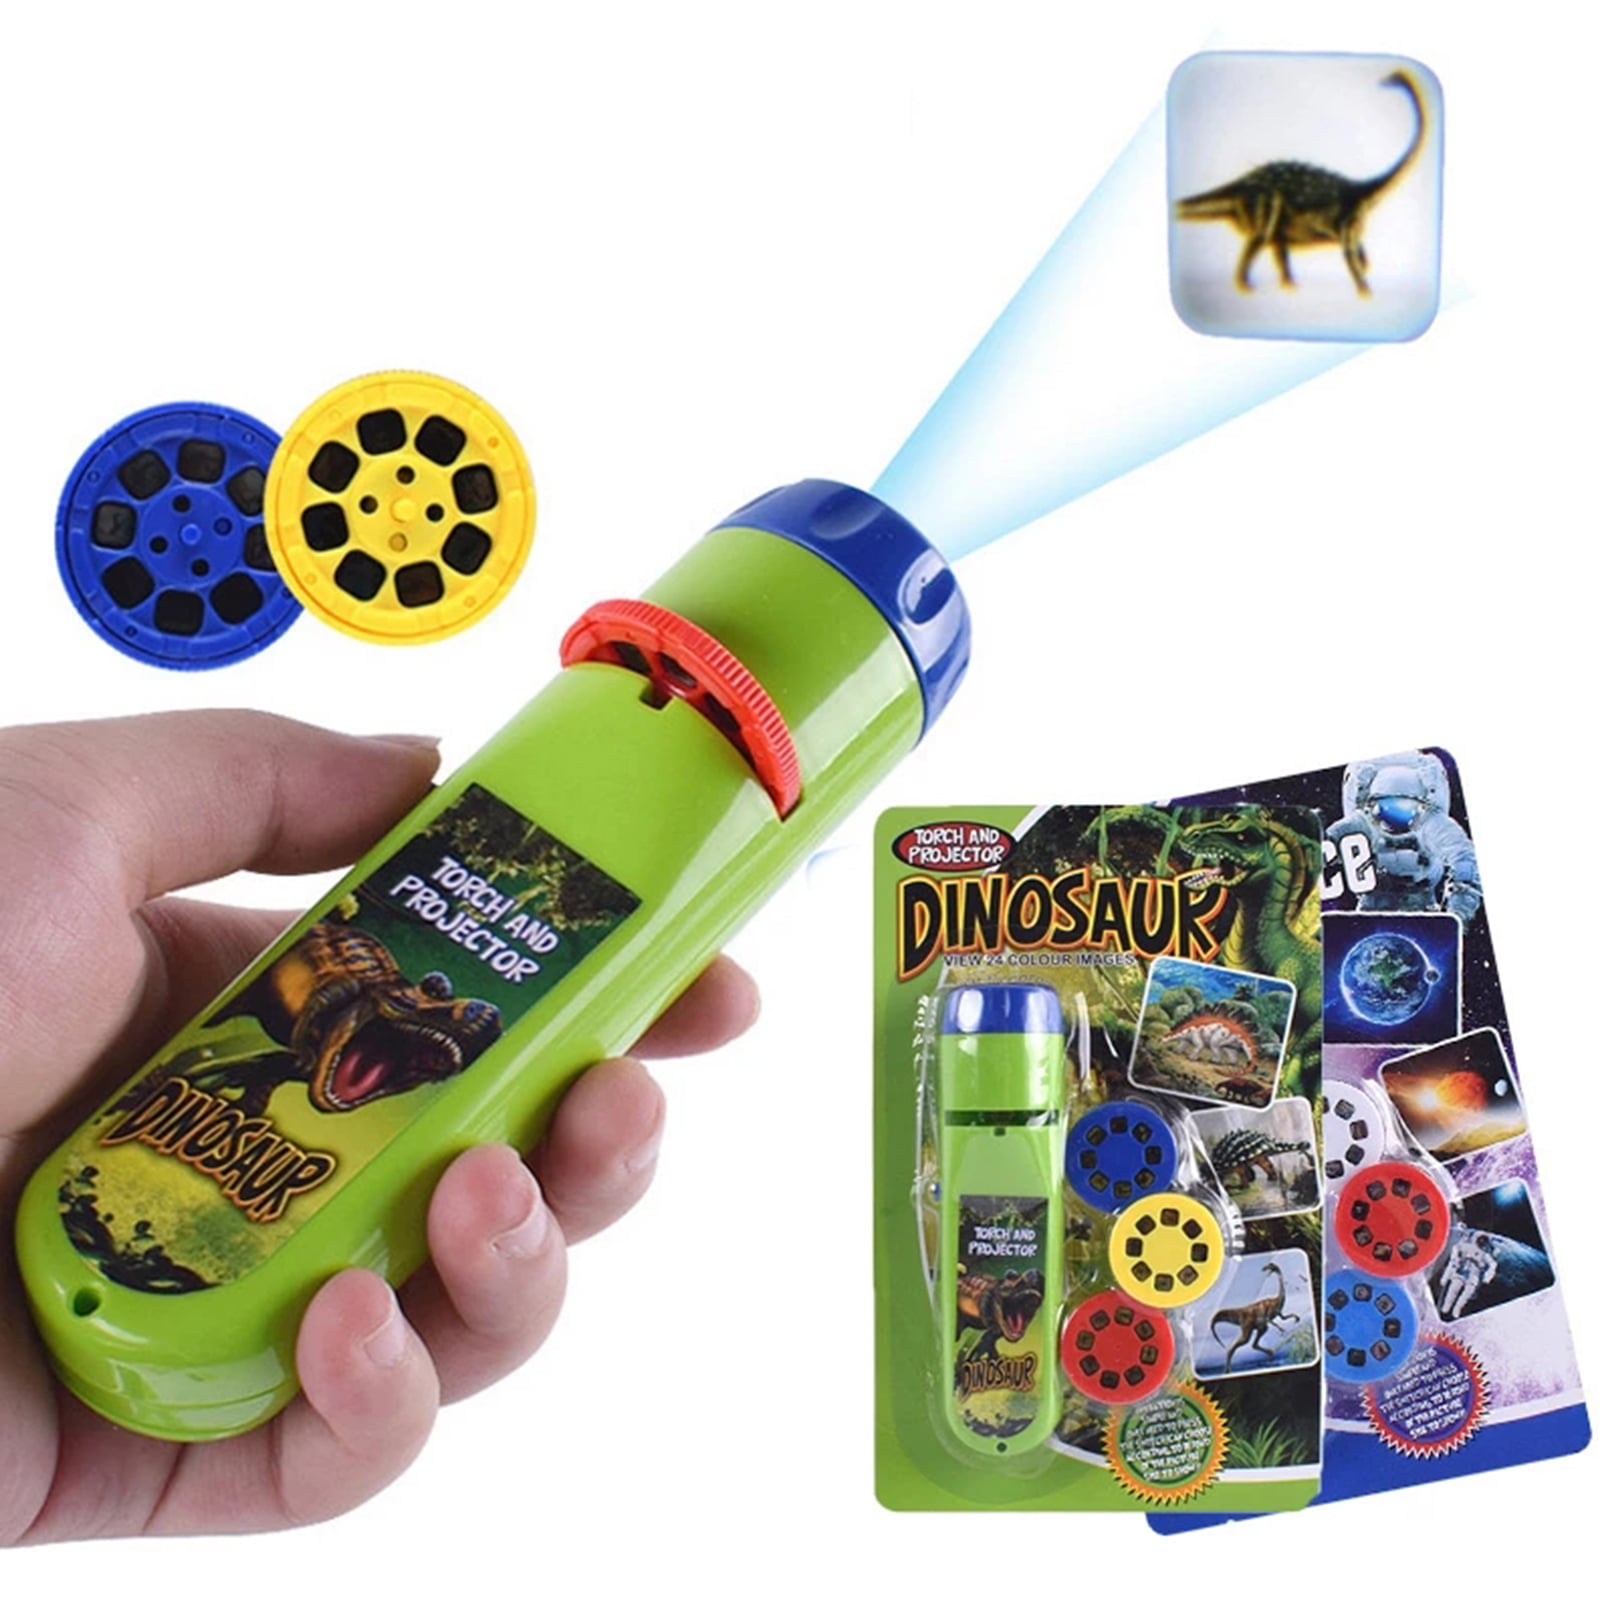 Toys for Kids Torch Projector 1 2 to 6 Year Old Girls Boys Educational Xmas Gift 